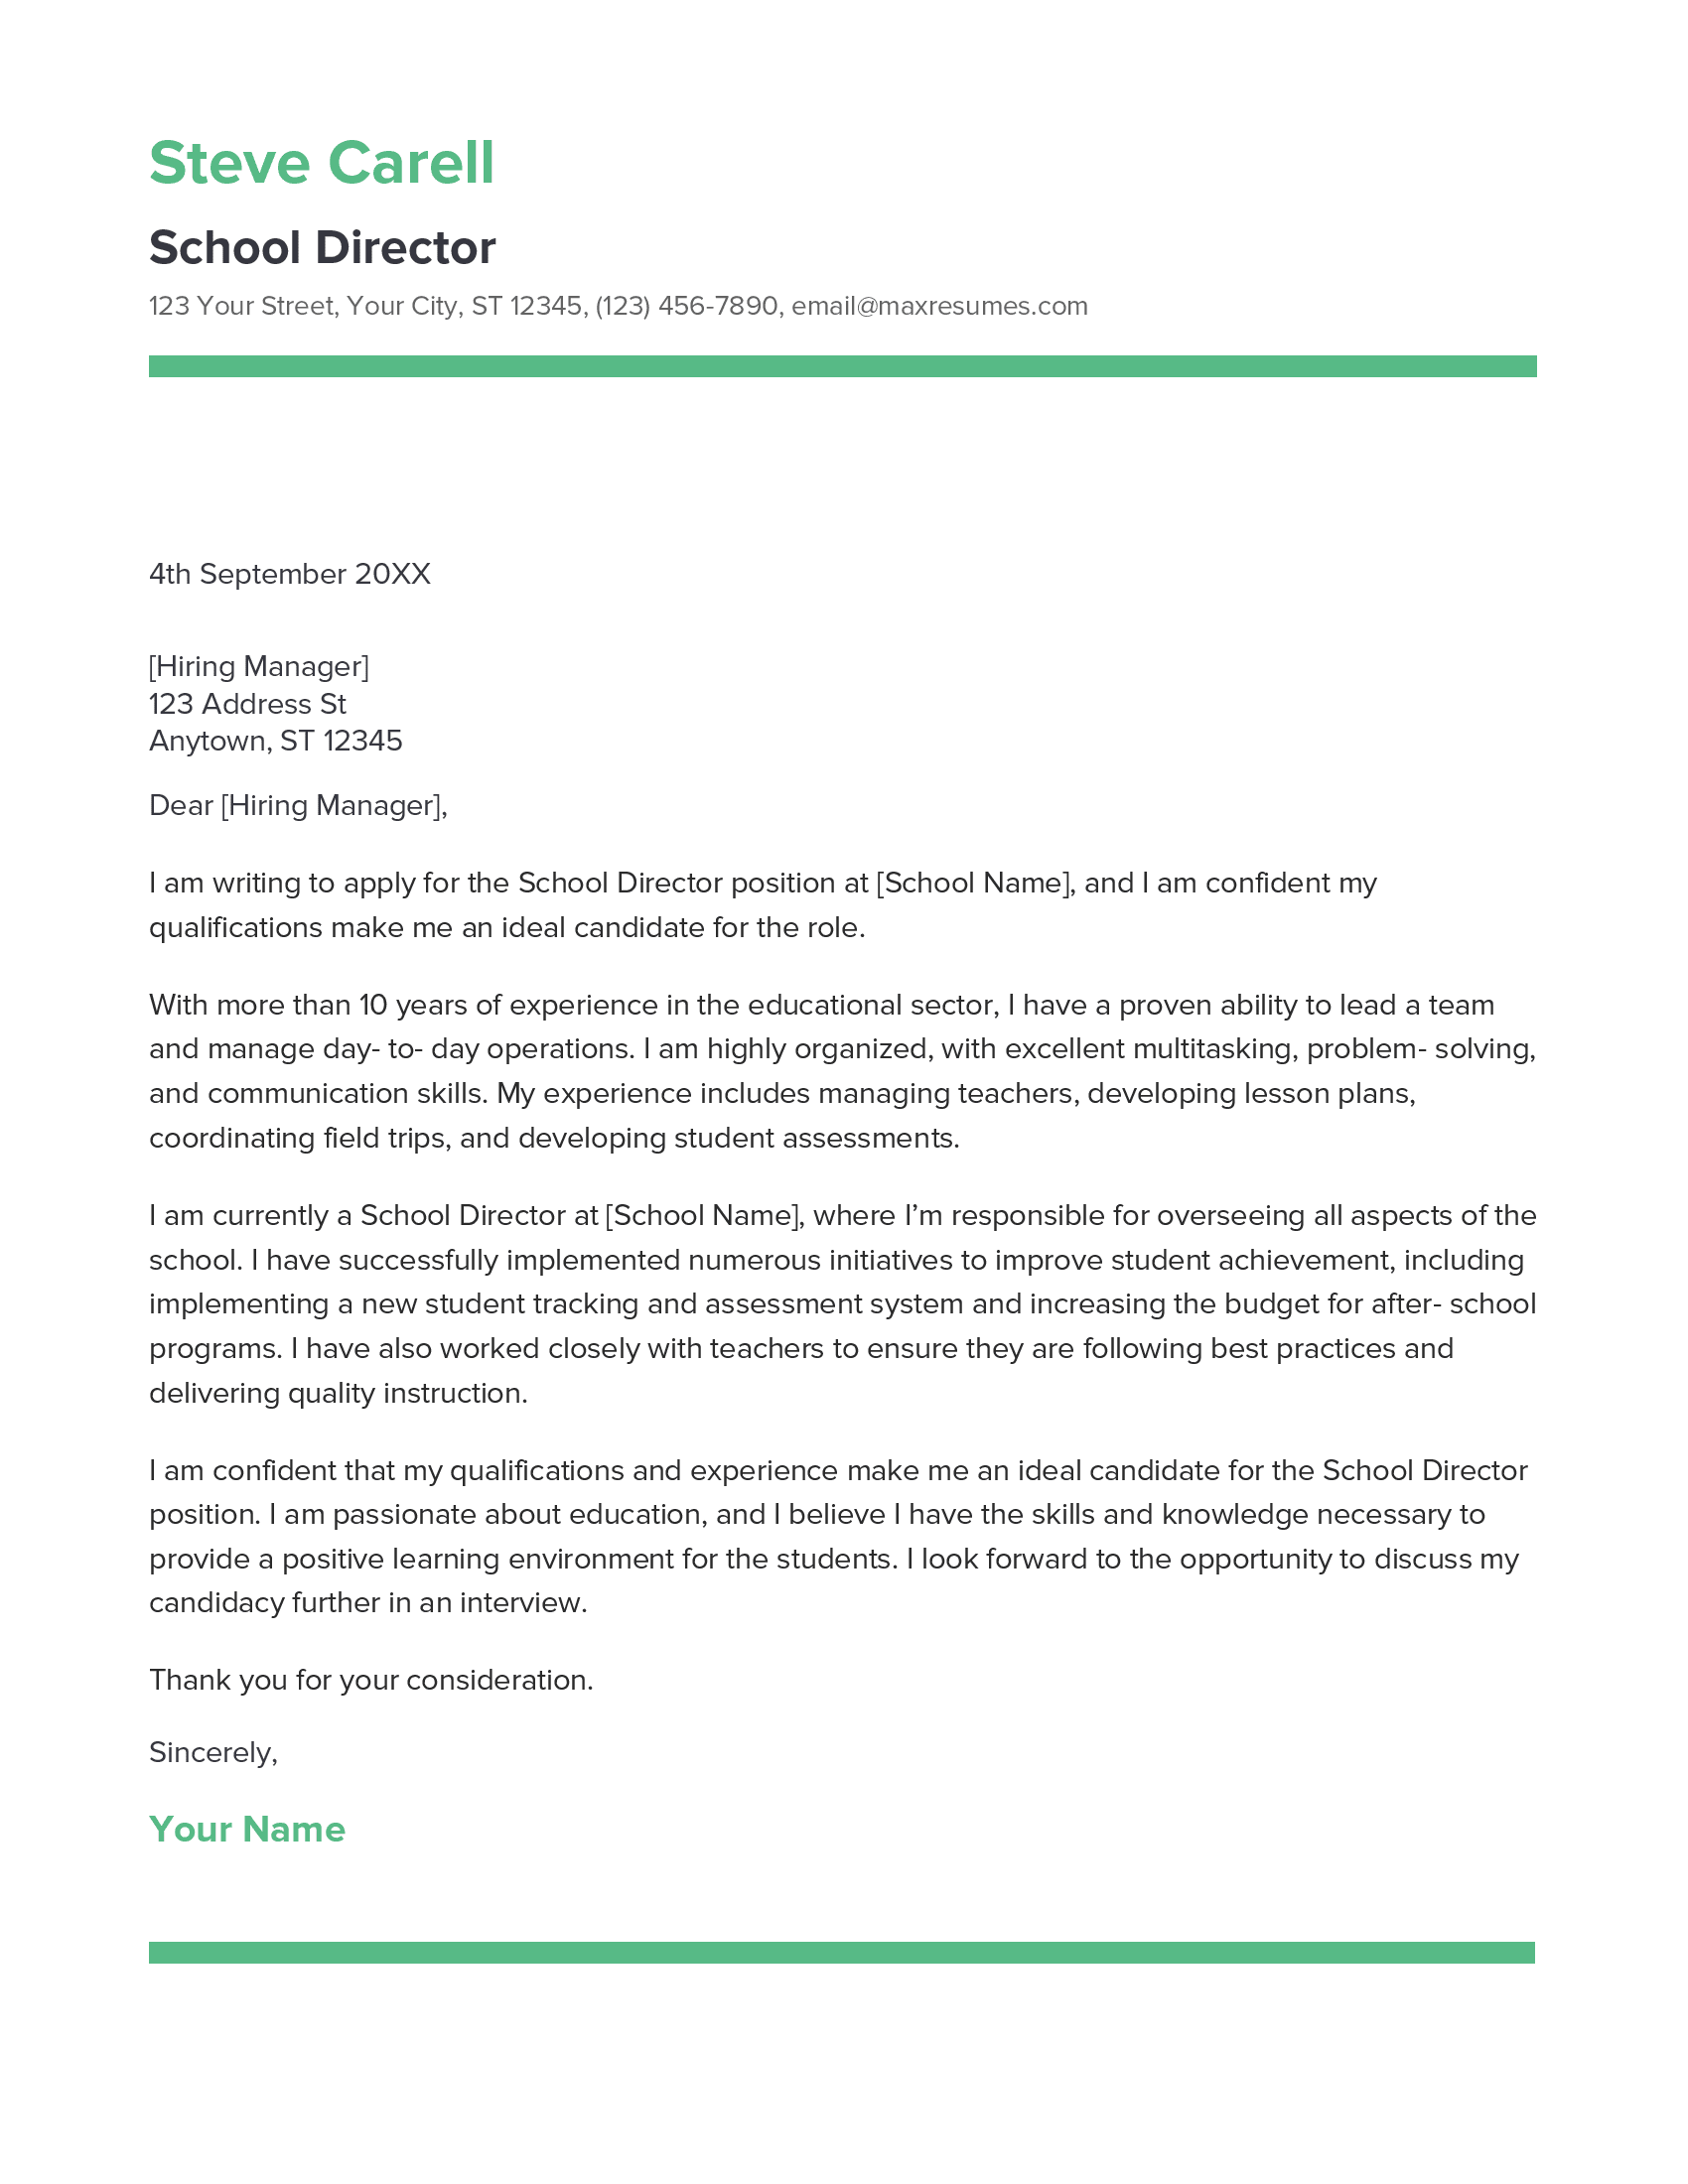 School Director Cover Letter Example